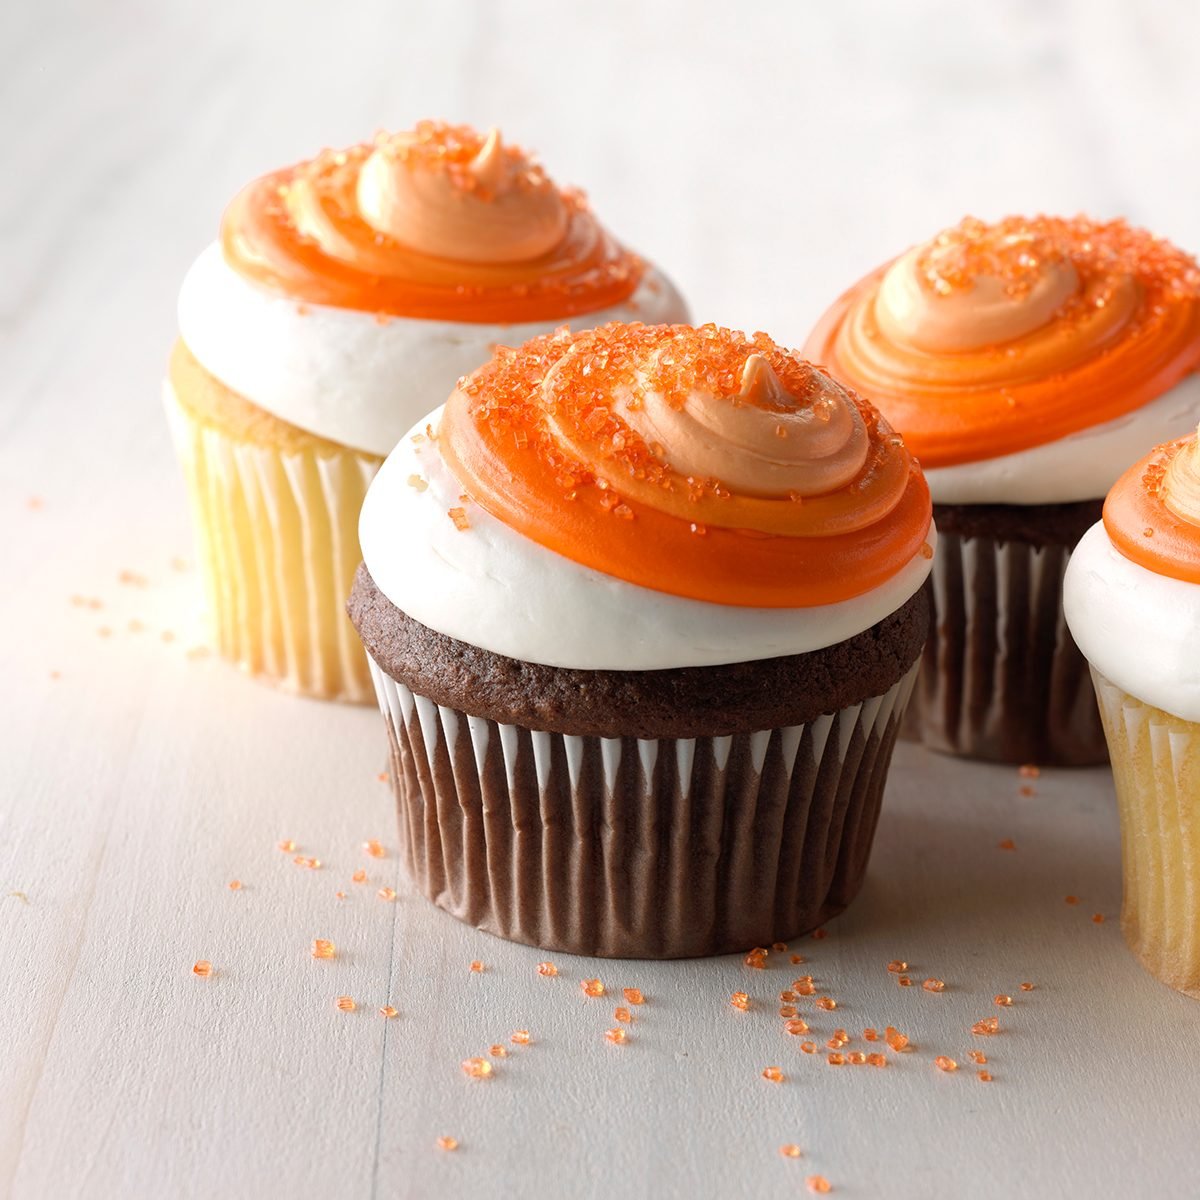 11 Easy Cupcake Decorating Ideas | Taste of Home